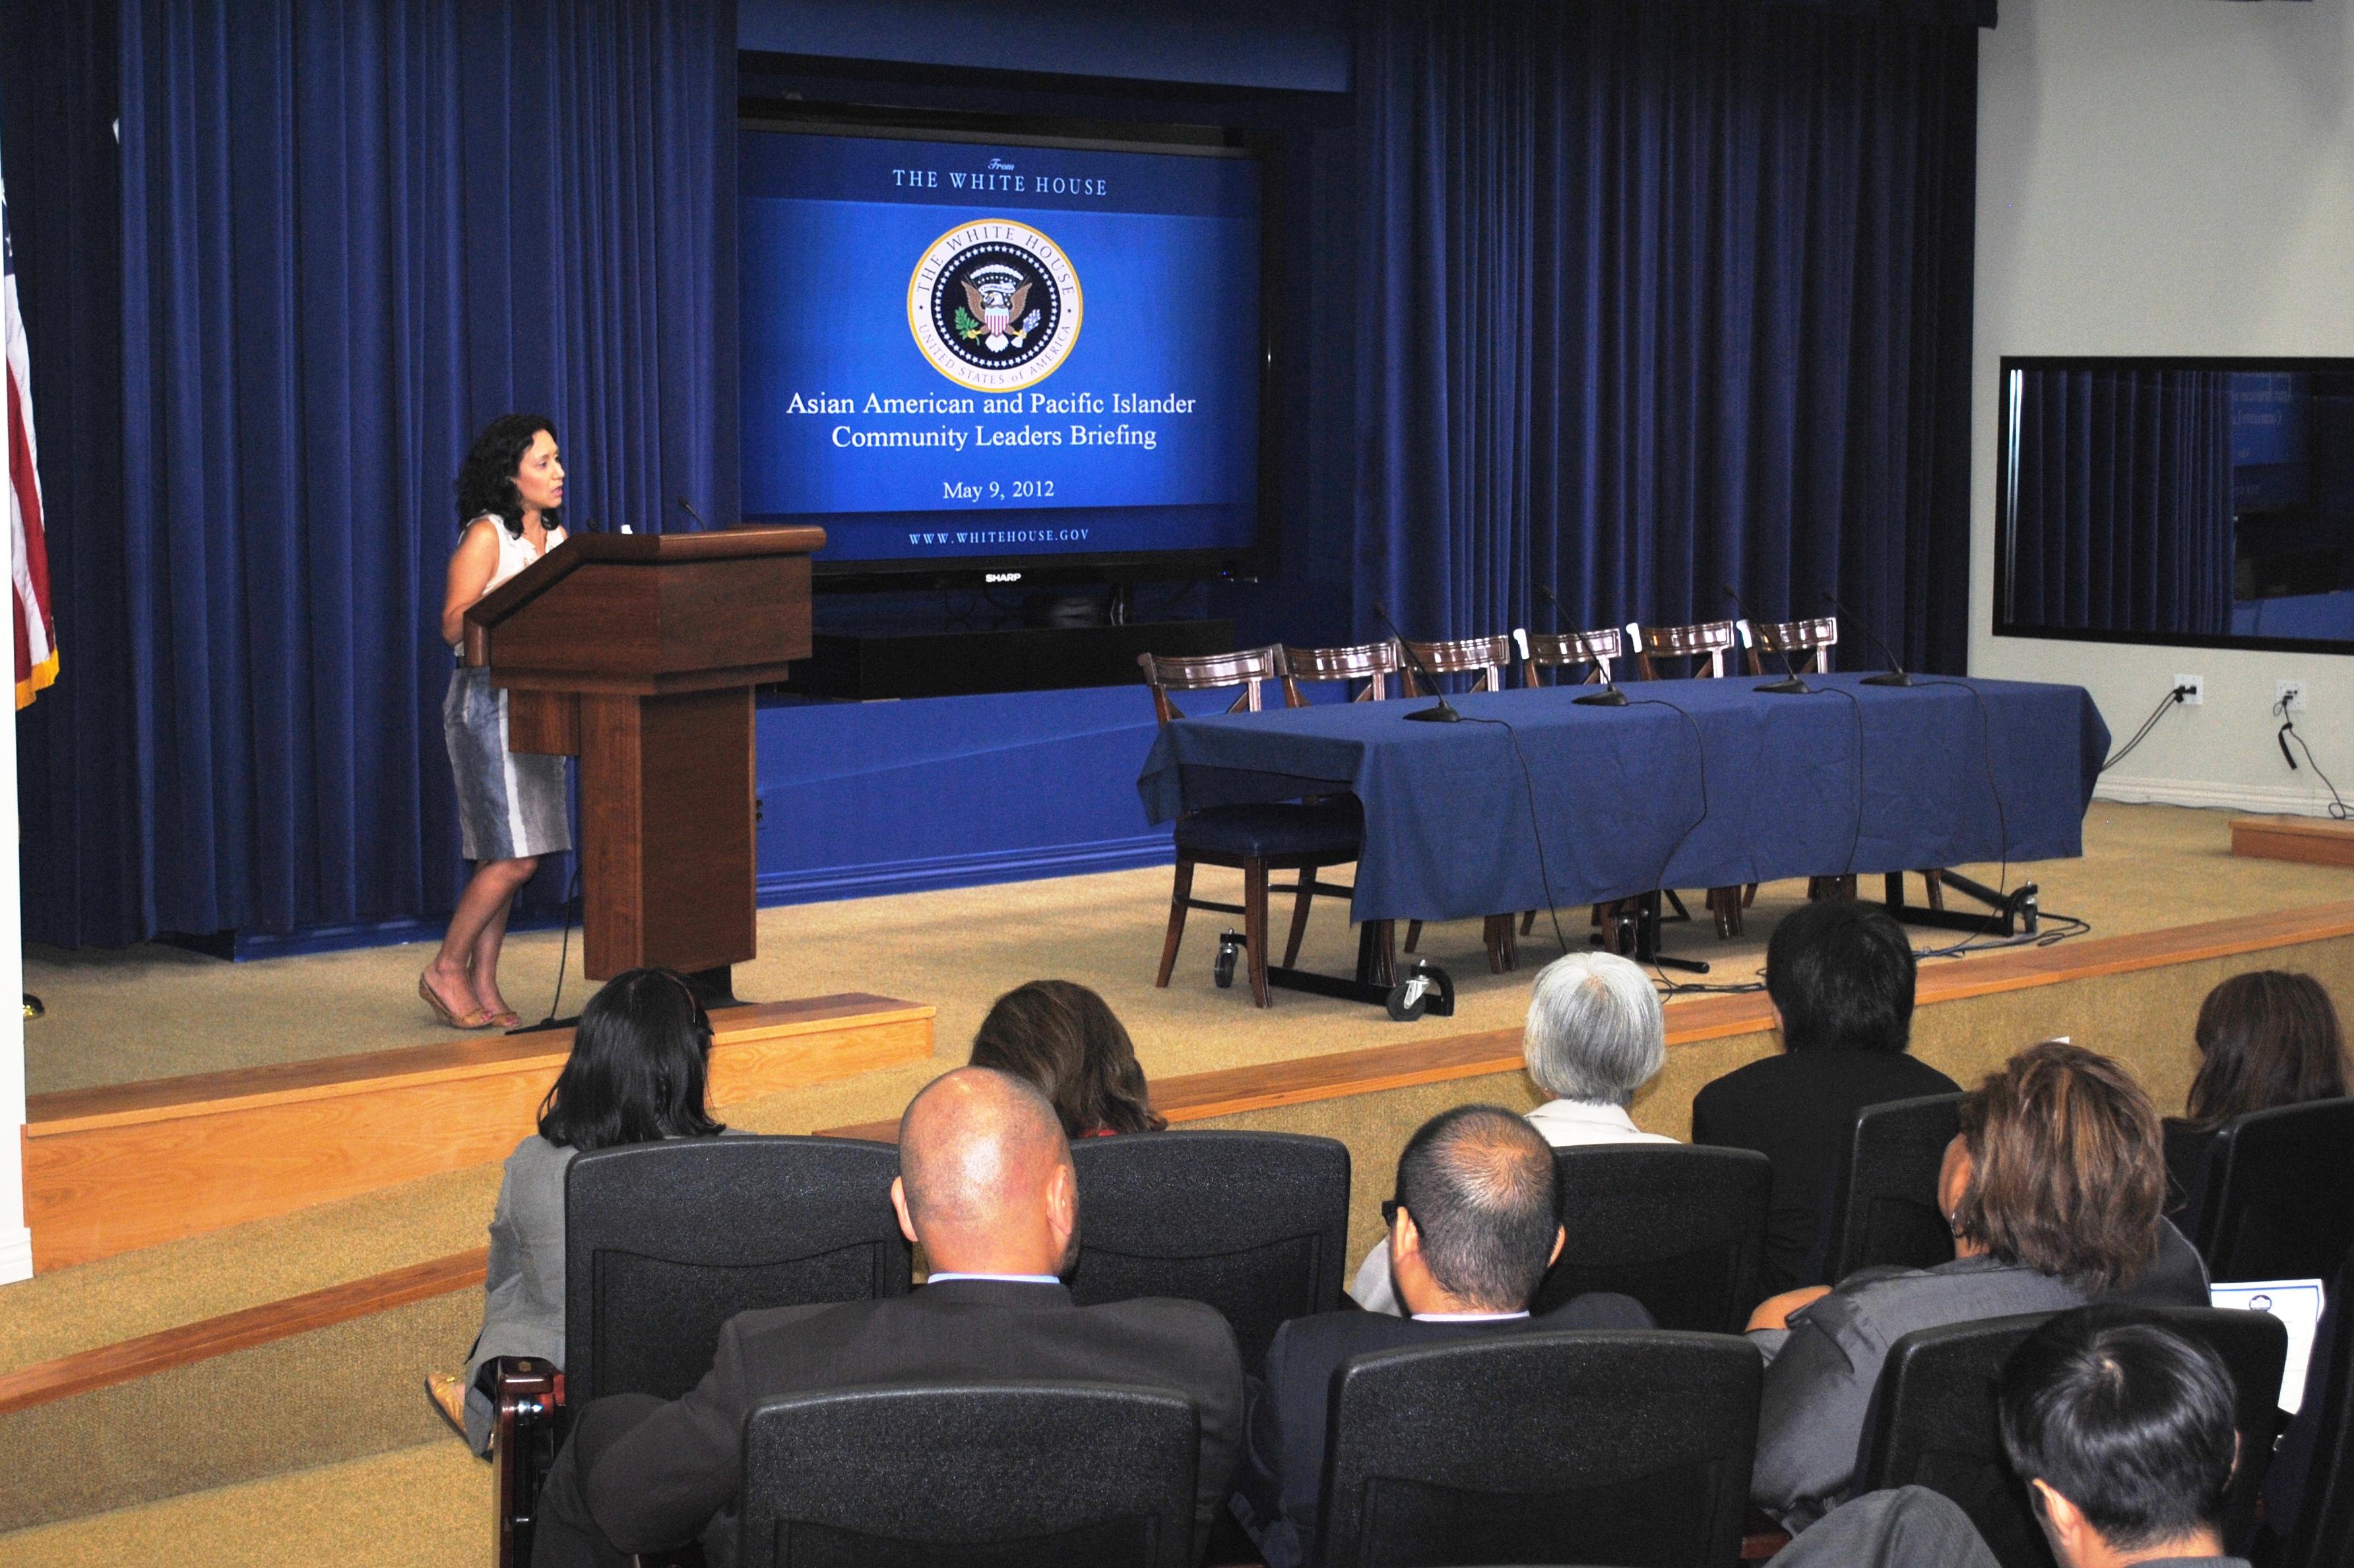 Felicia Escobar at the WHIAAPI’s Heritage Month Community Leaders Briefing